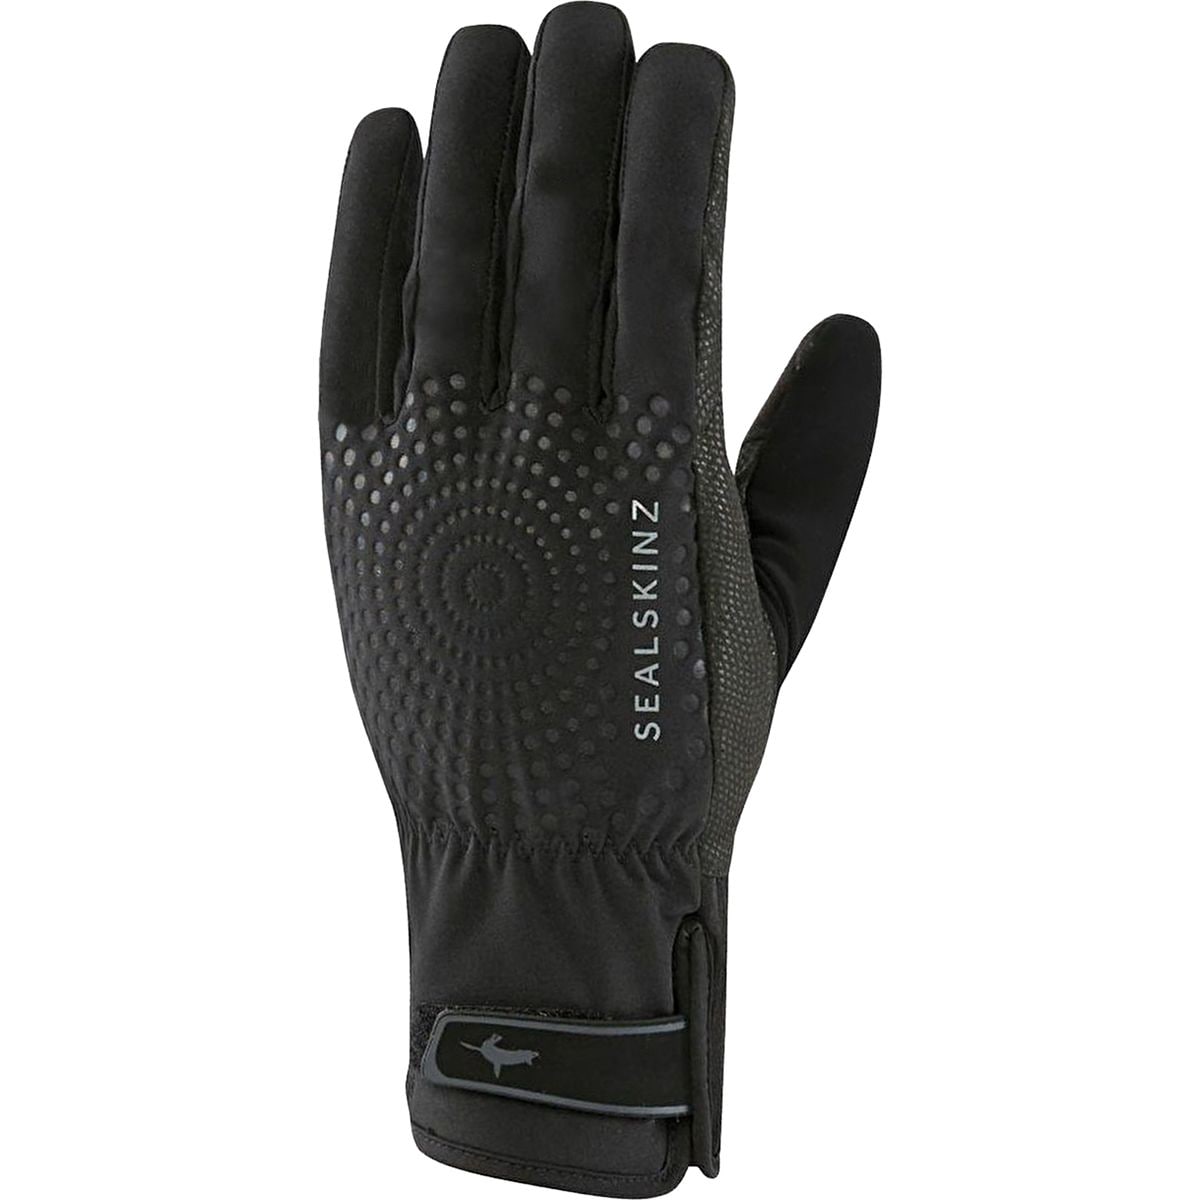 SealSkinz All Weather Cycle Gloves Men's